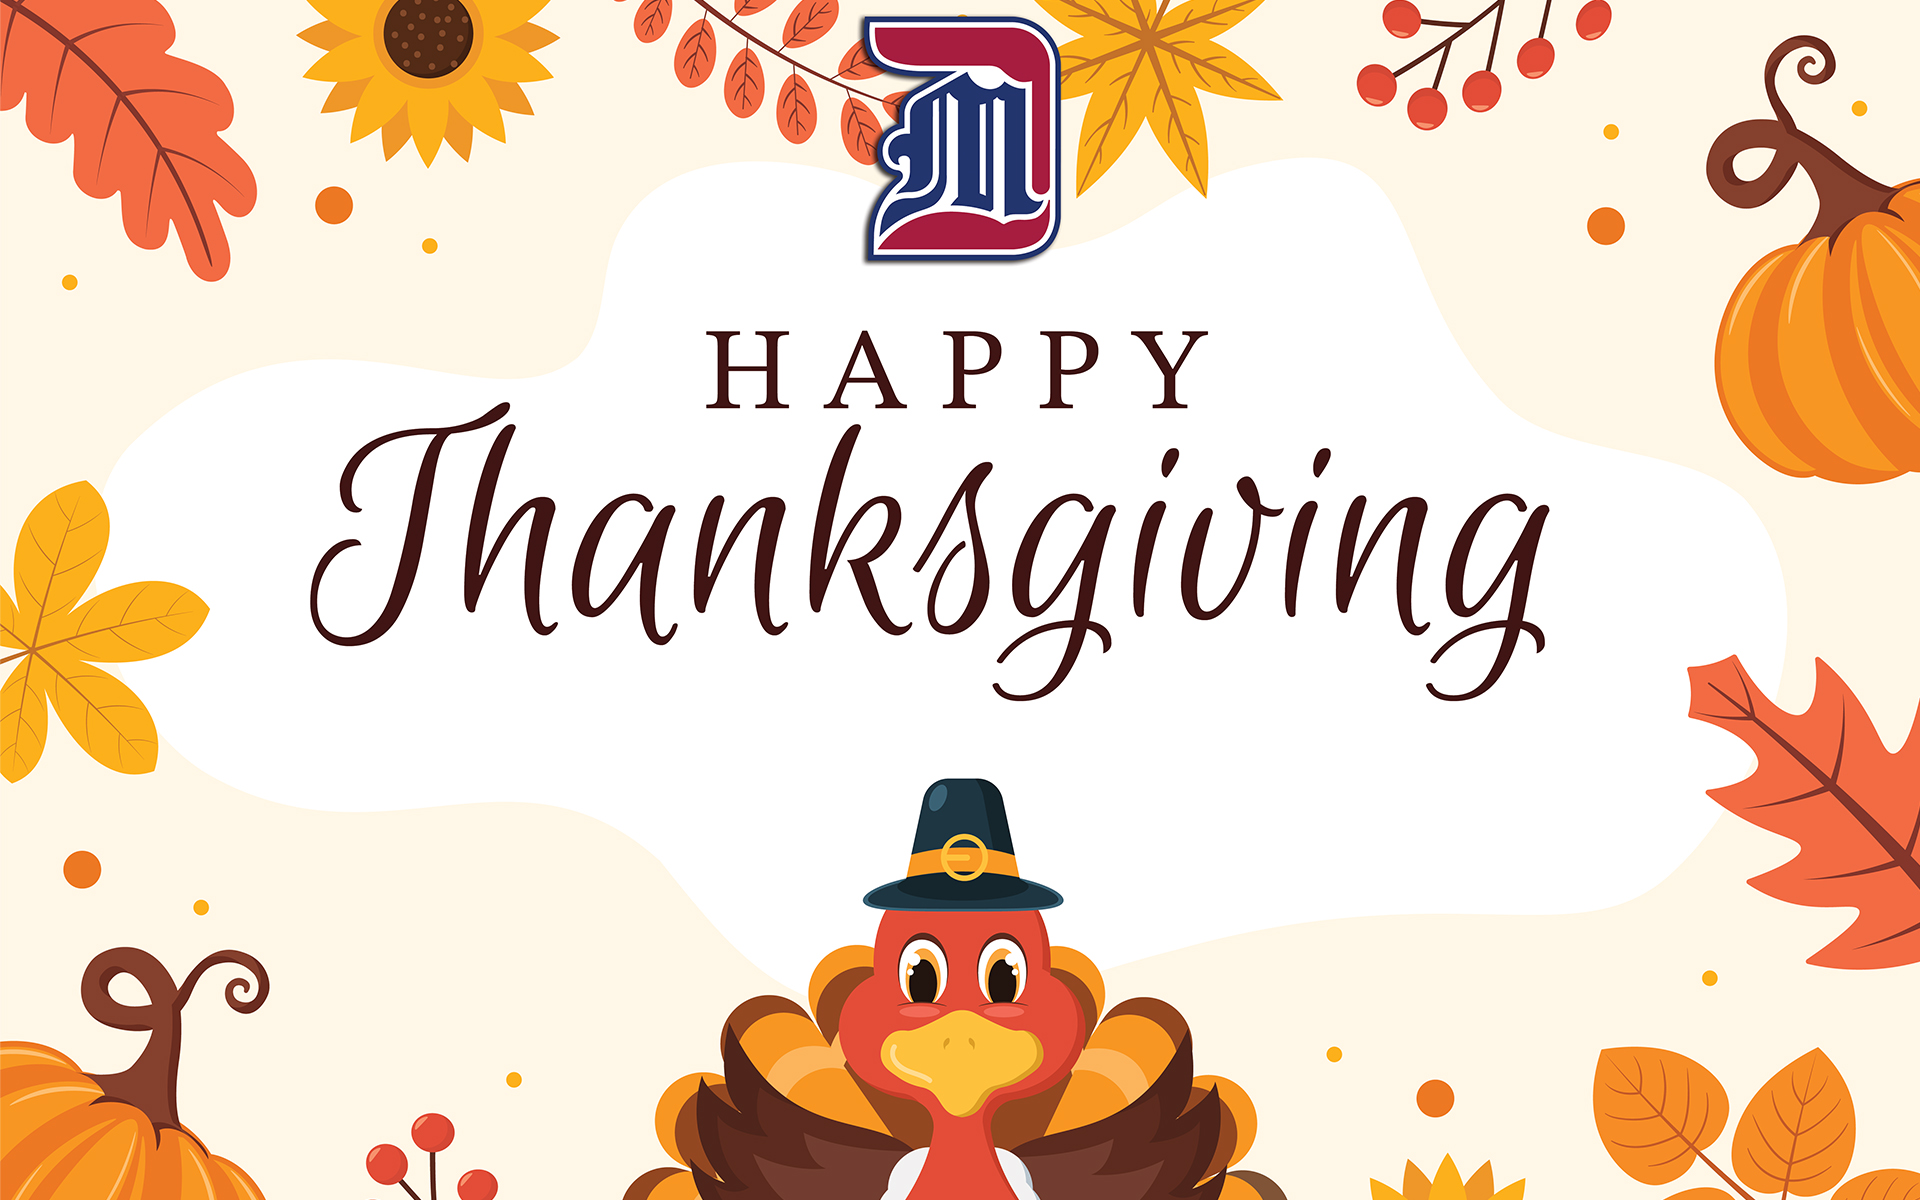 A Happy Thanksgiving graphic with a cartoon turkey on it, as well as the University of Detroit Mercy logo at the top.